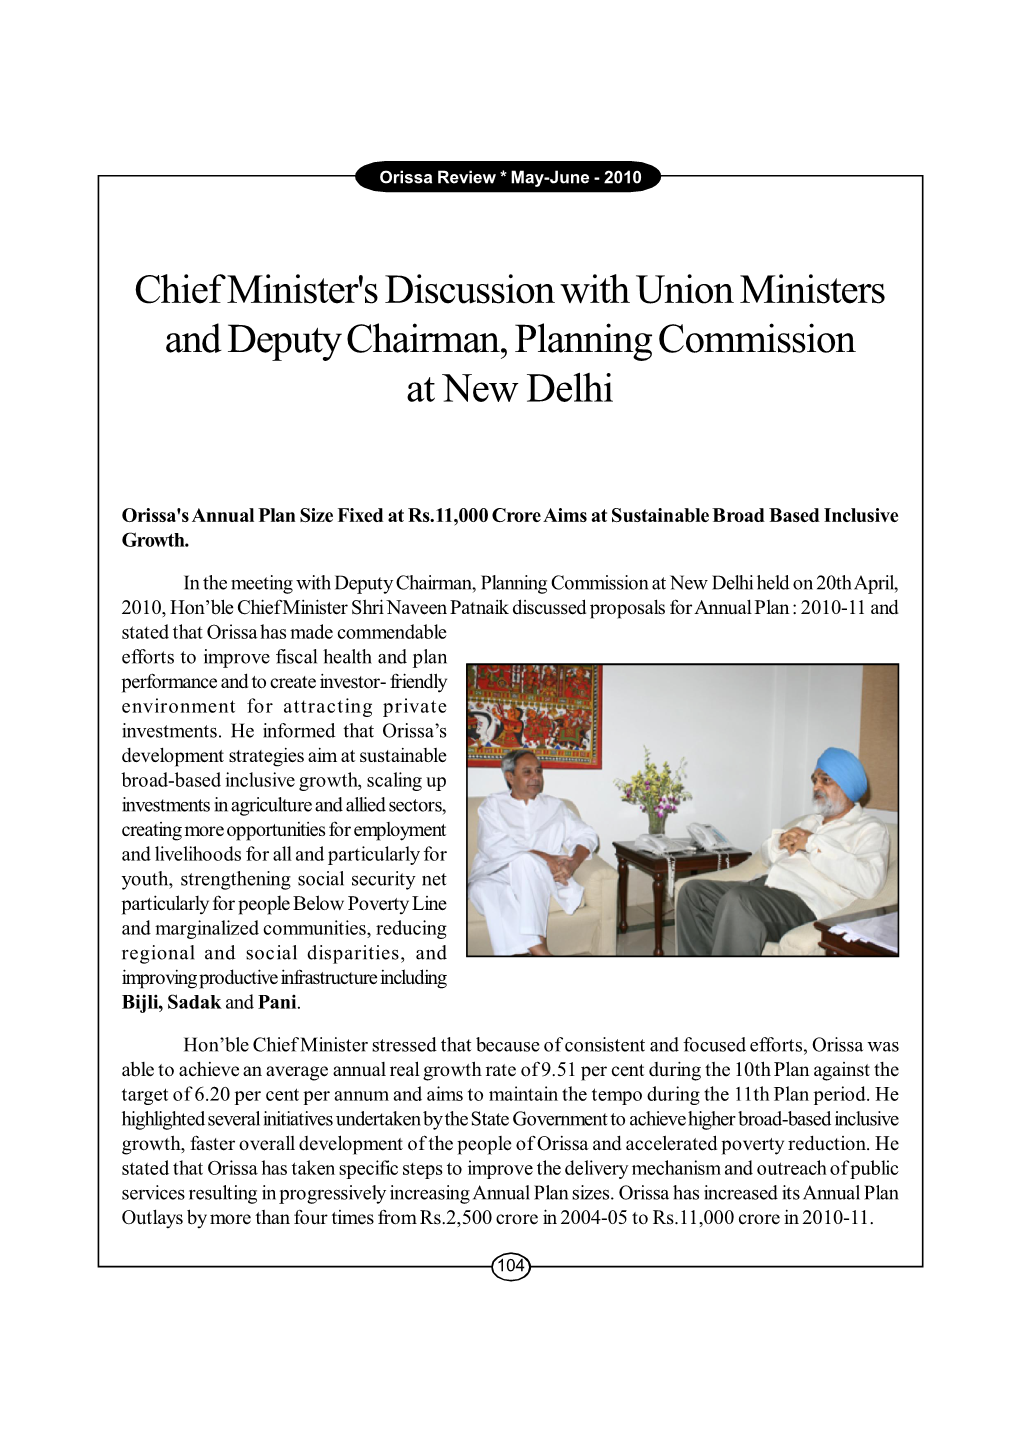 Chief Minister's Discussion with Union Ministers and Deputy Chairman, Planning Commission at New Delhi